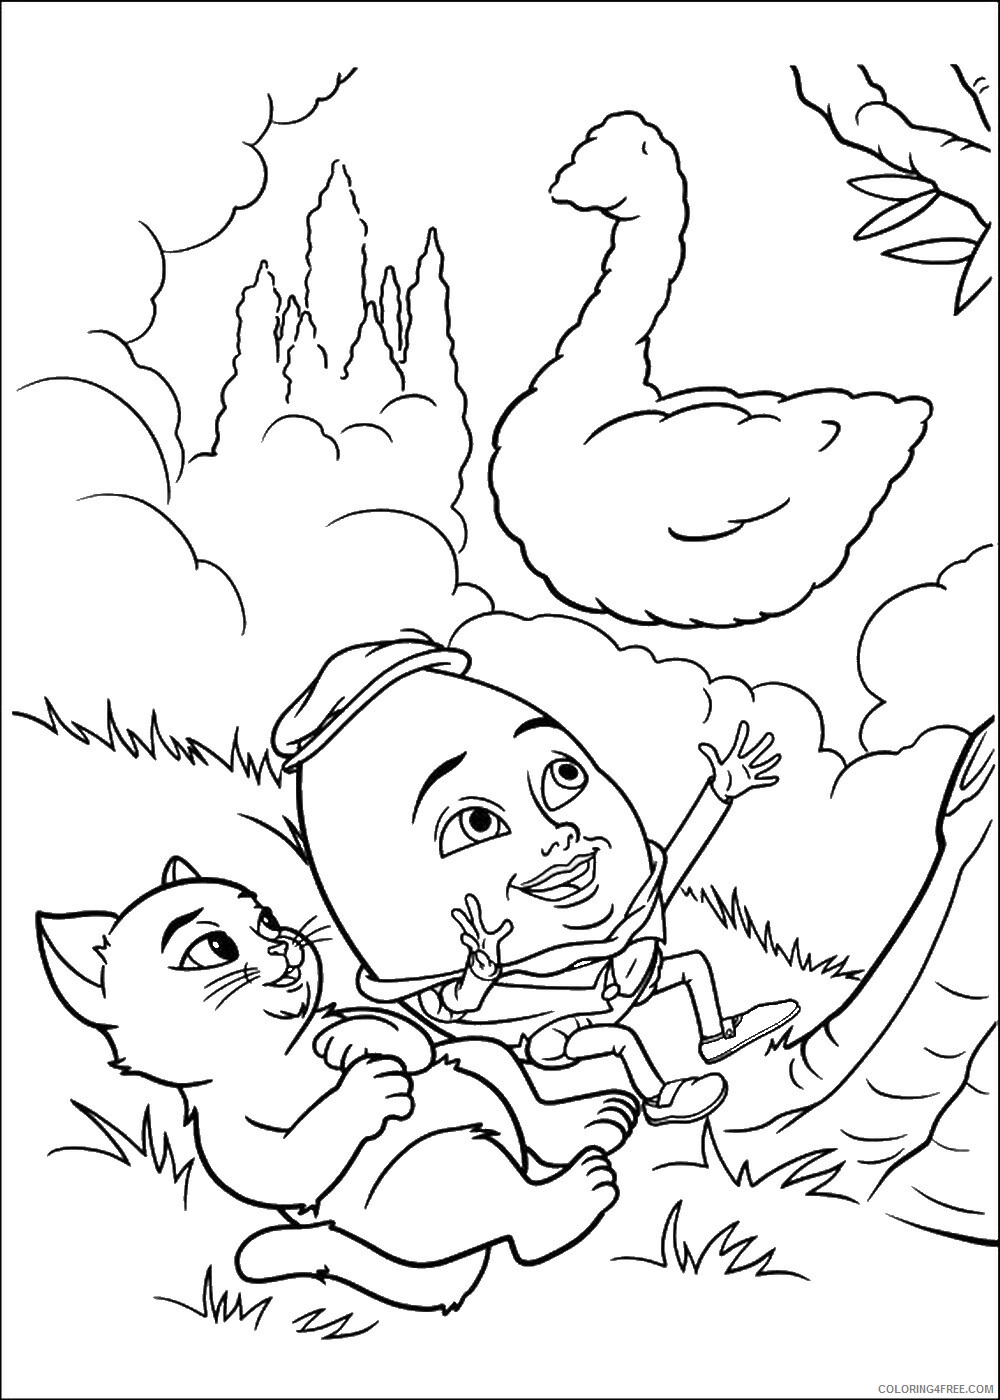 Puss in Boots Coloring Pages TV Film puss_boots_cl_17 Printable 2020 06926 Coloring4free